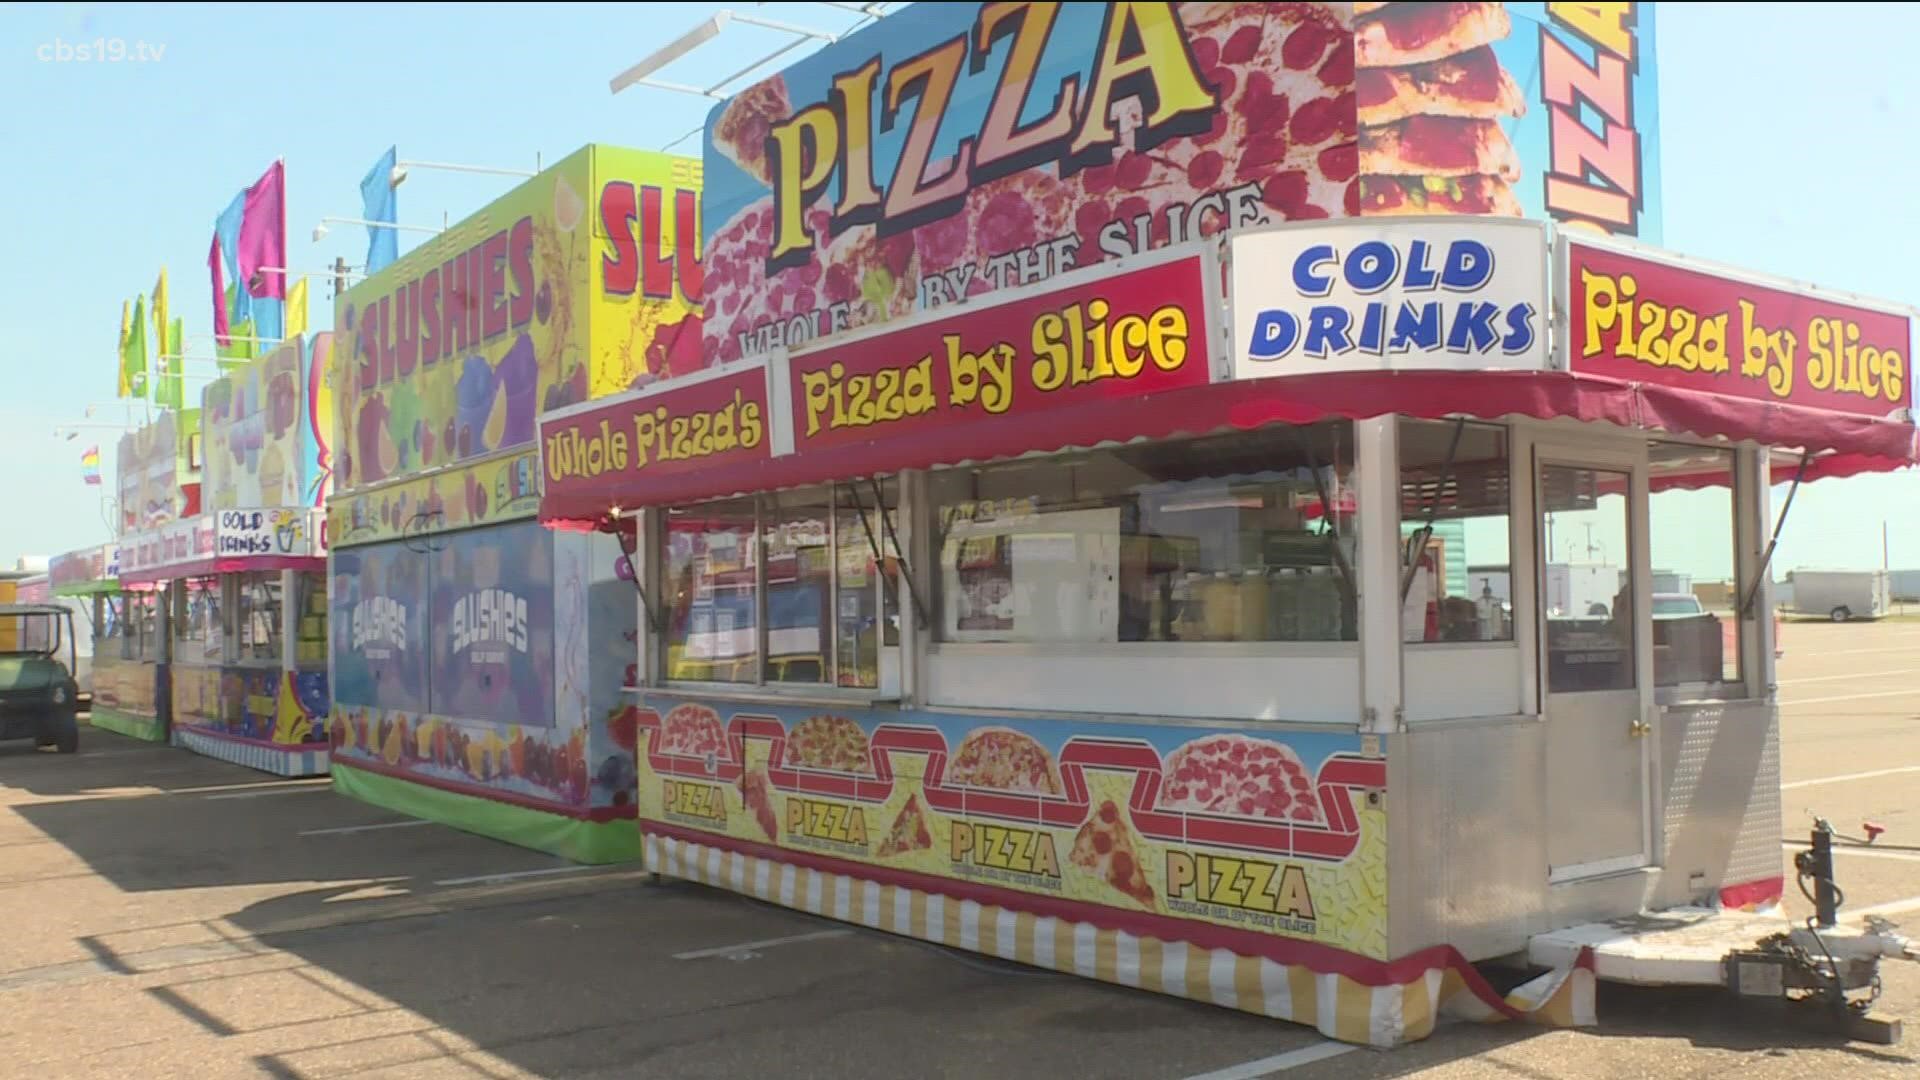 The fair is set to start Friday, Sept. 10 at 6 p.m. until 12 a.m. and will continue until September 18th.